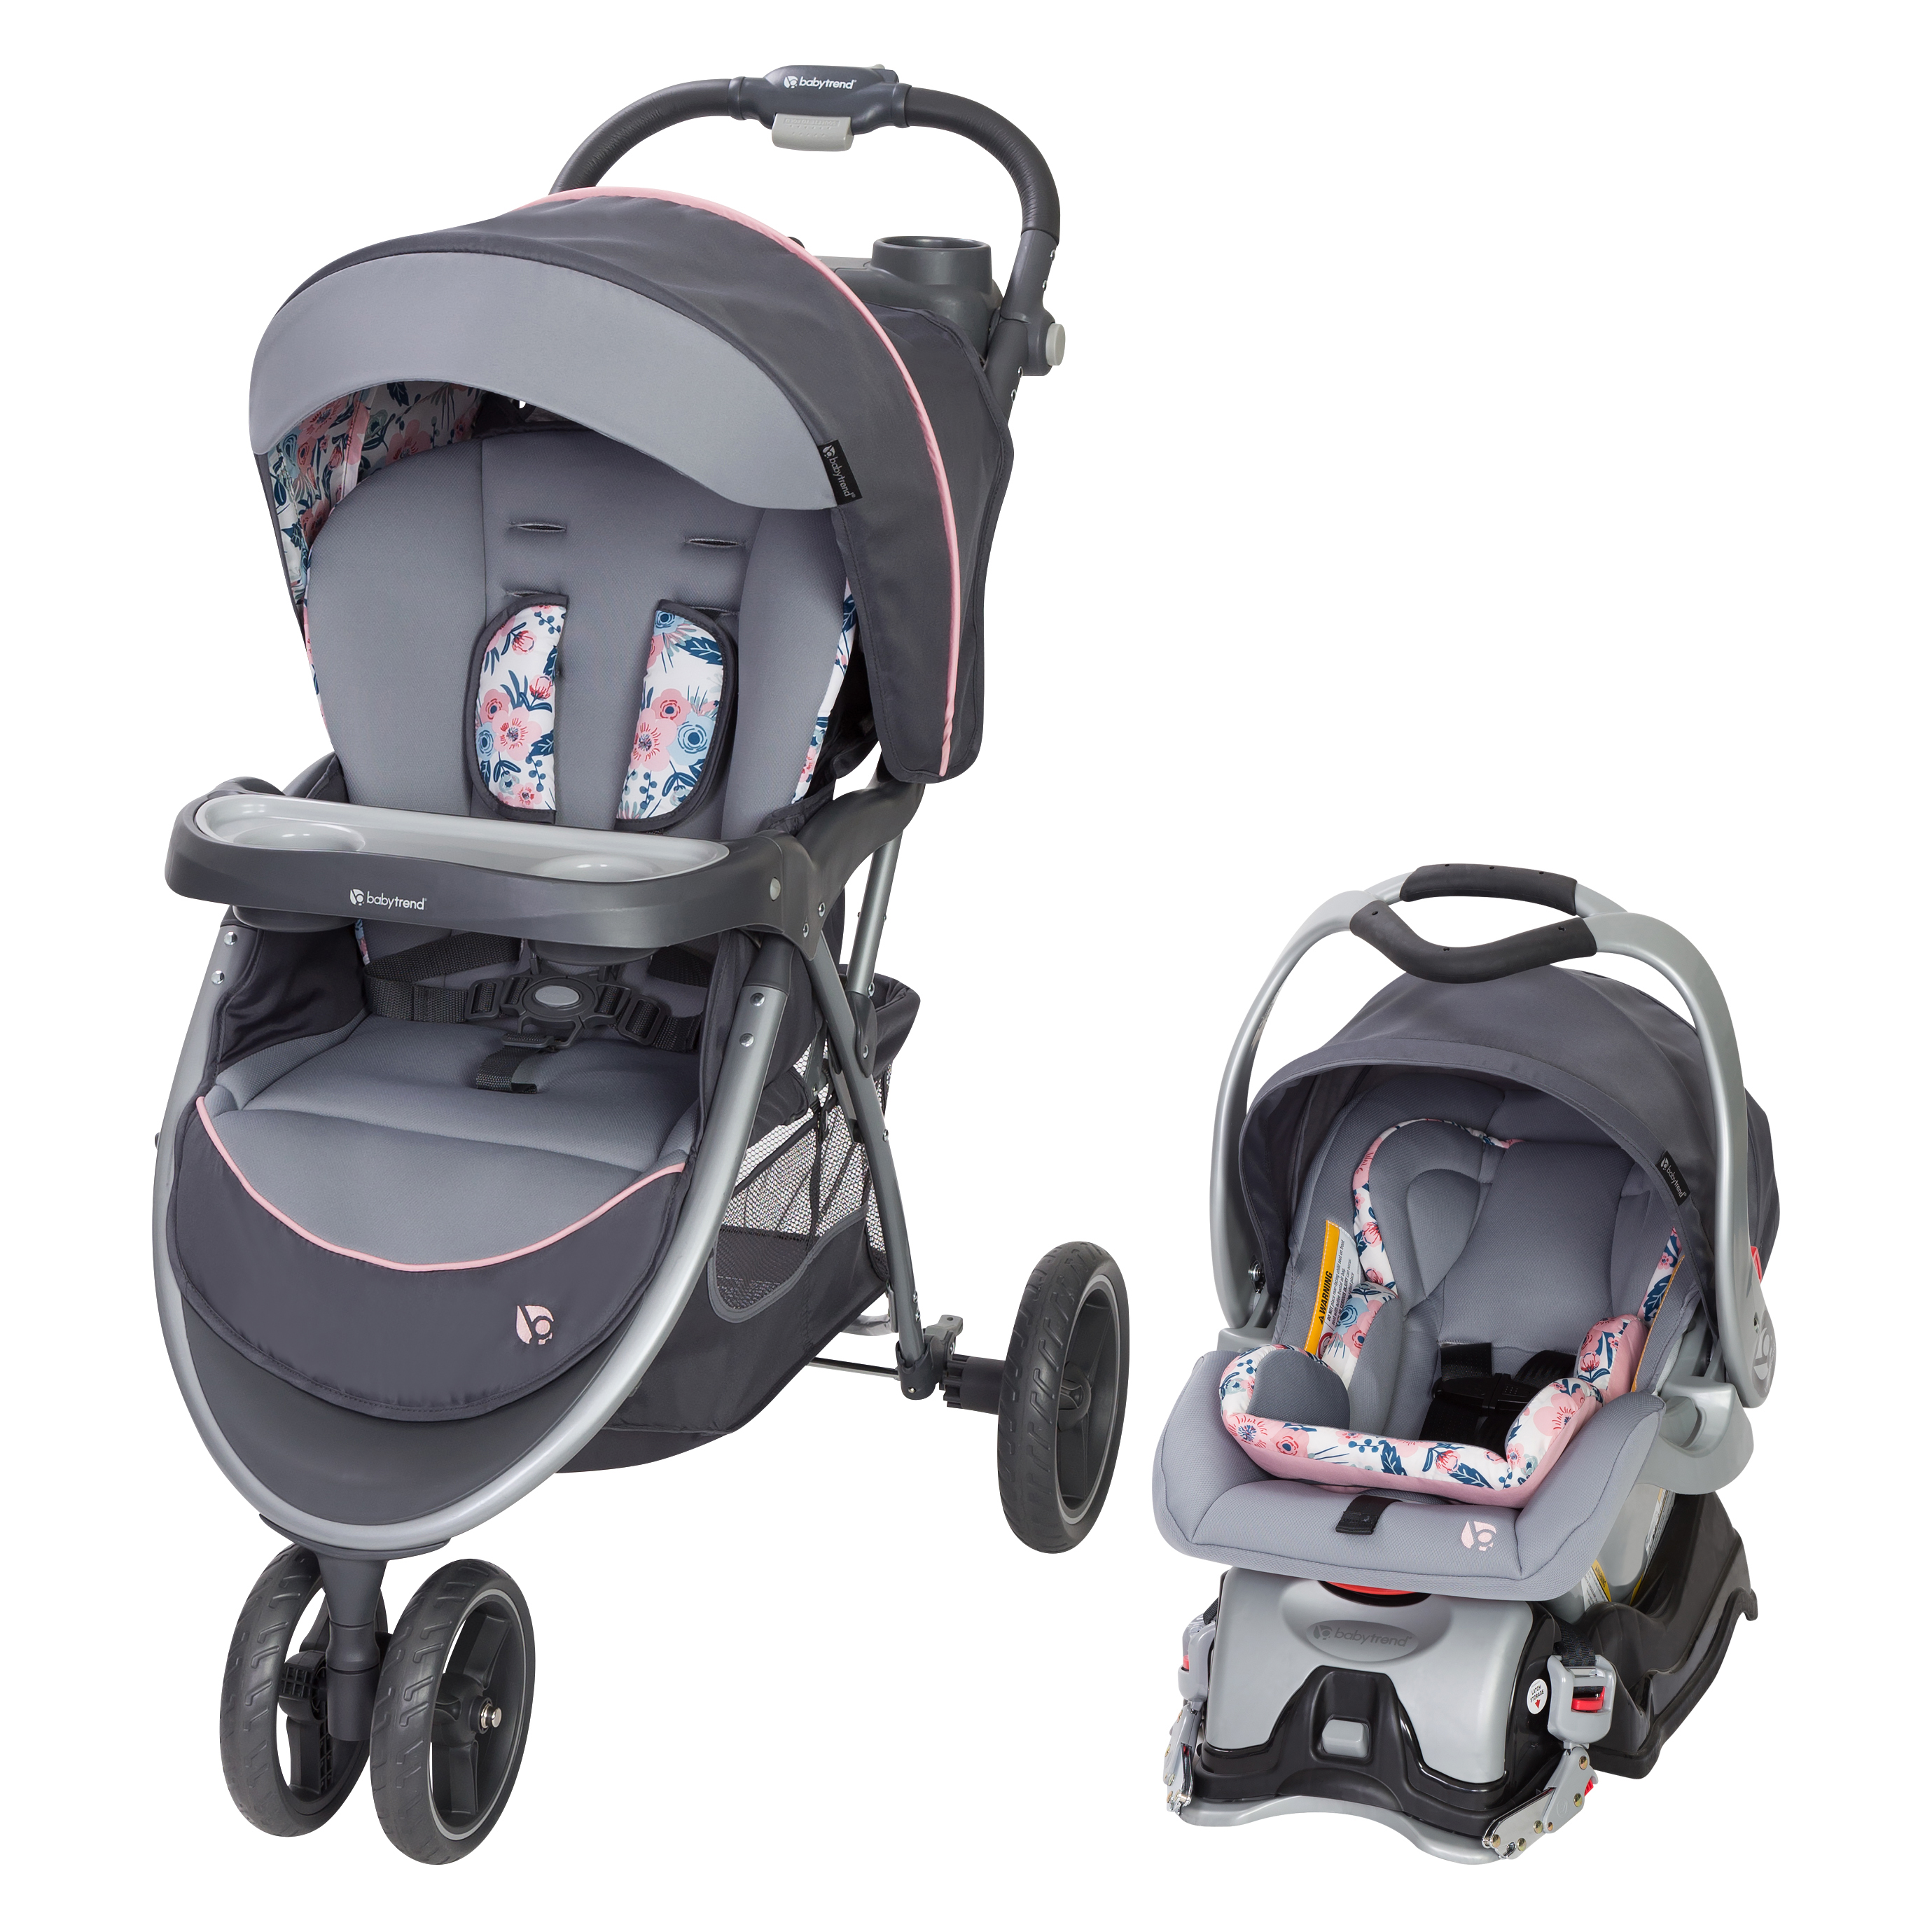 kmart baby strollers clearance